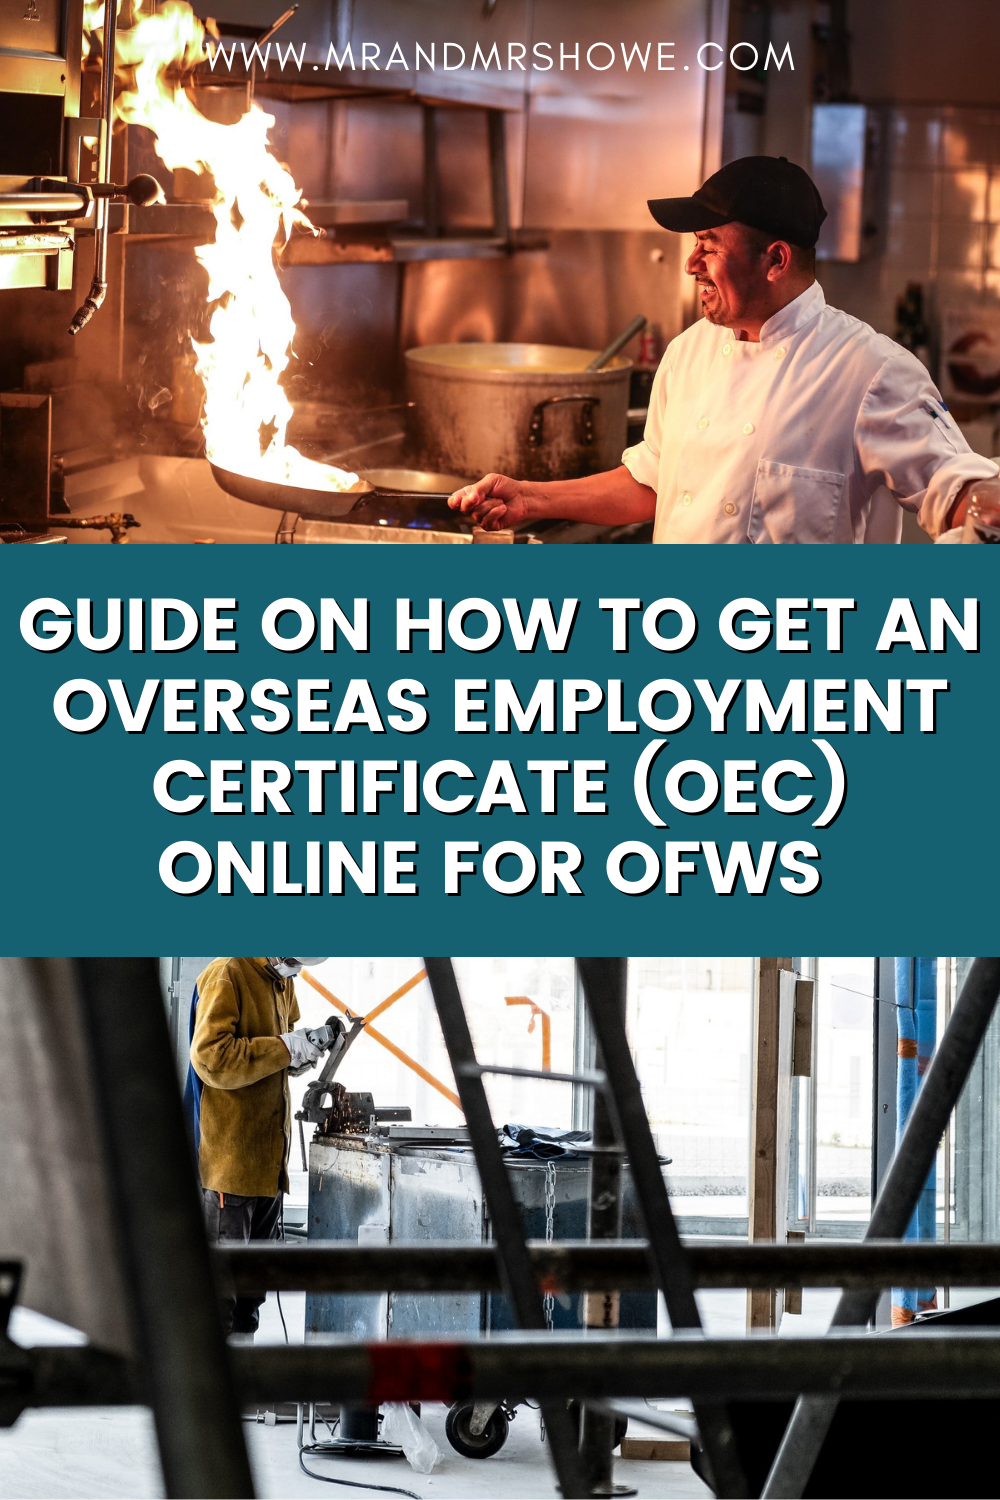 How to get an Overseas Employment Certificate (OEC) Online for OFWs [Balik-Manggagawa Online Processing System]1.png